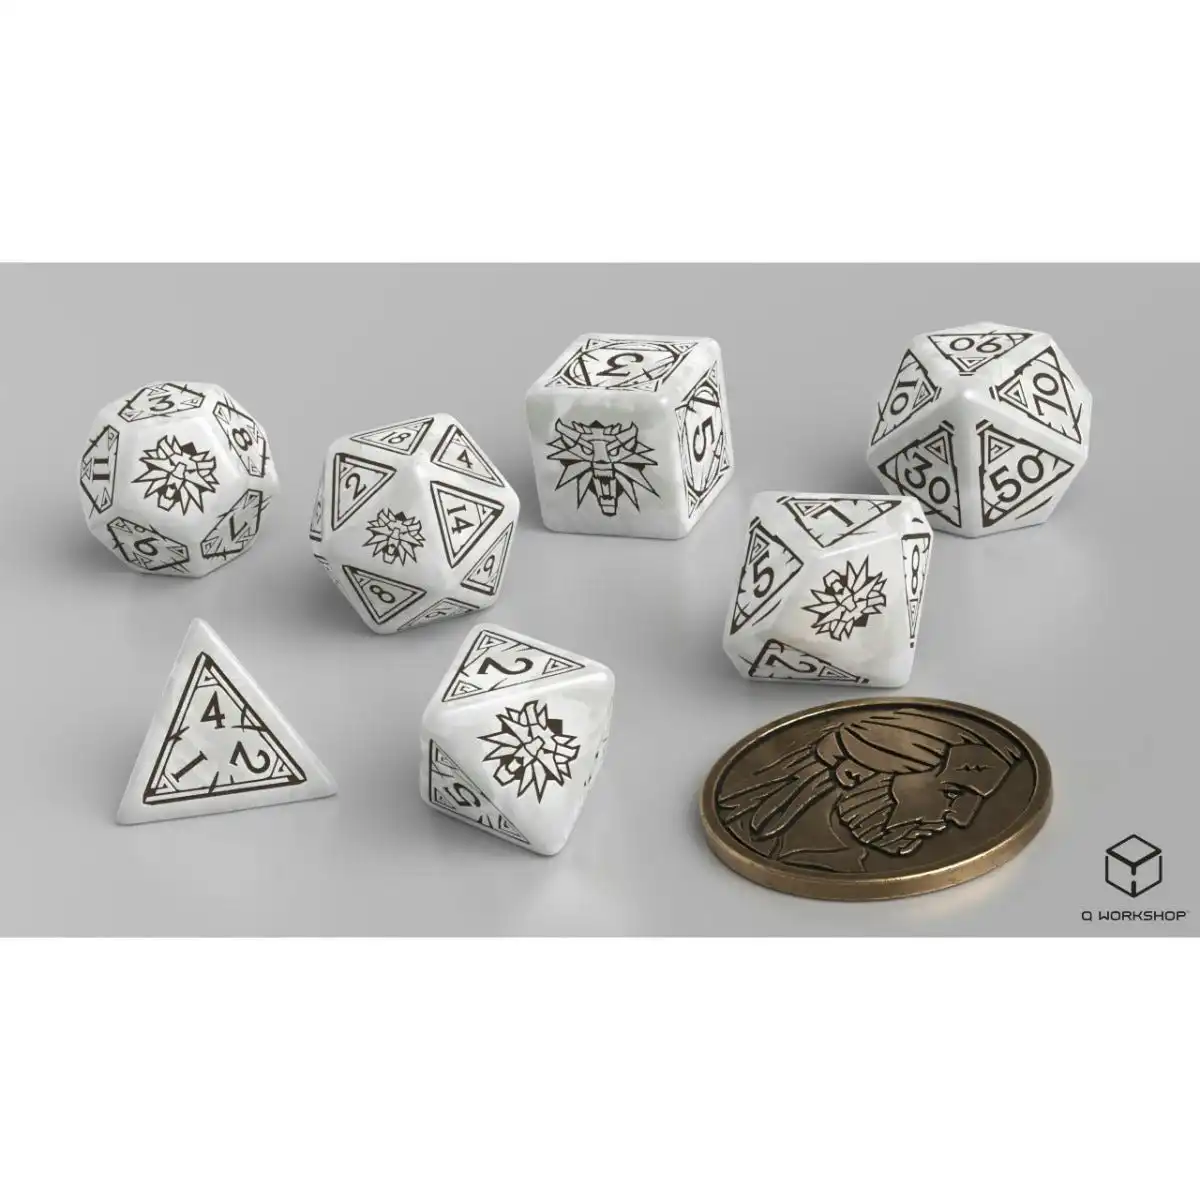 Q Workshop - The Witcher Dice Set Geralt - The White Wolf Dice Set 7 With Coin